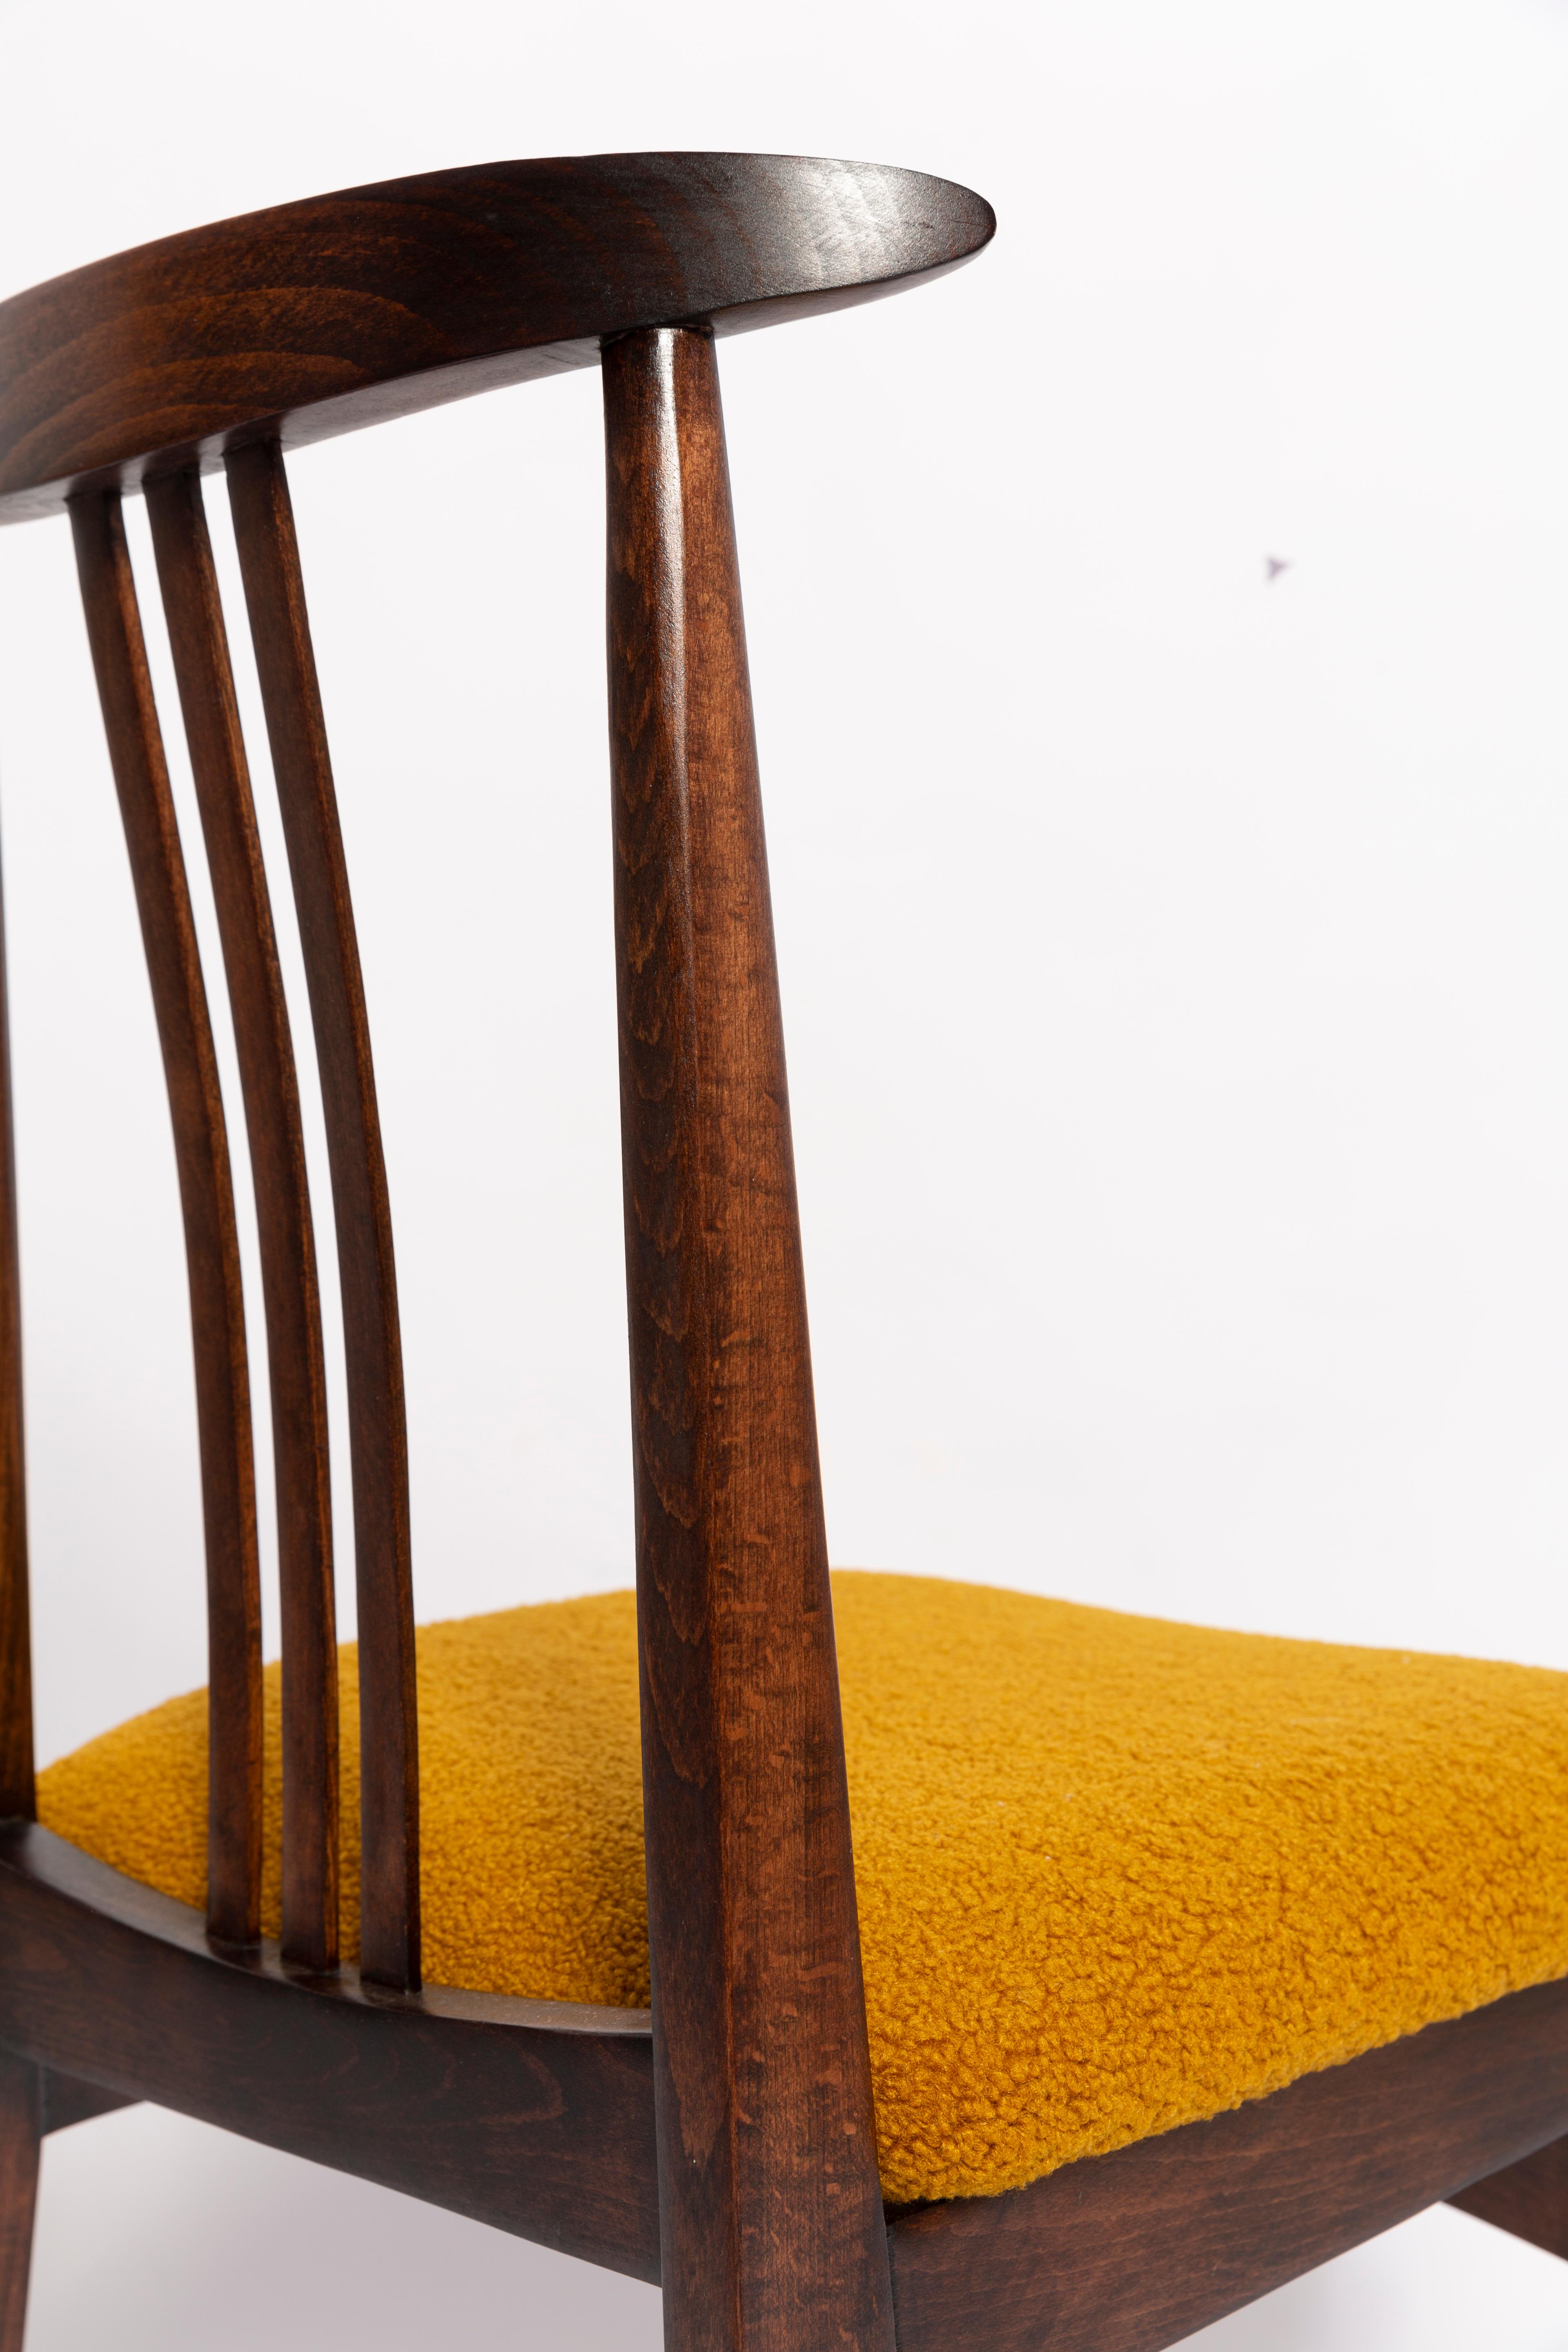 Hand-Crafted Mid-Century Ochre Boucle Chair, Walnut Wood, M. Zielinski, Europe, 1960s For Sale